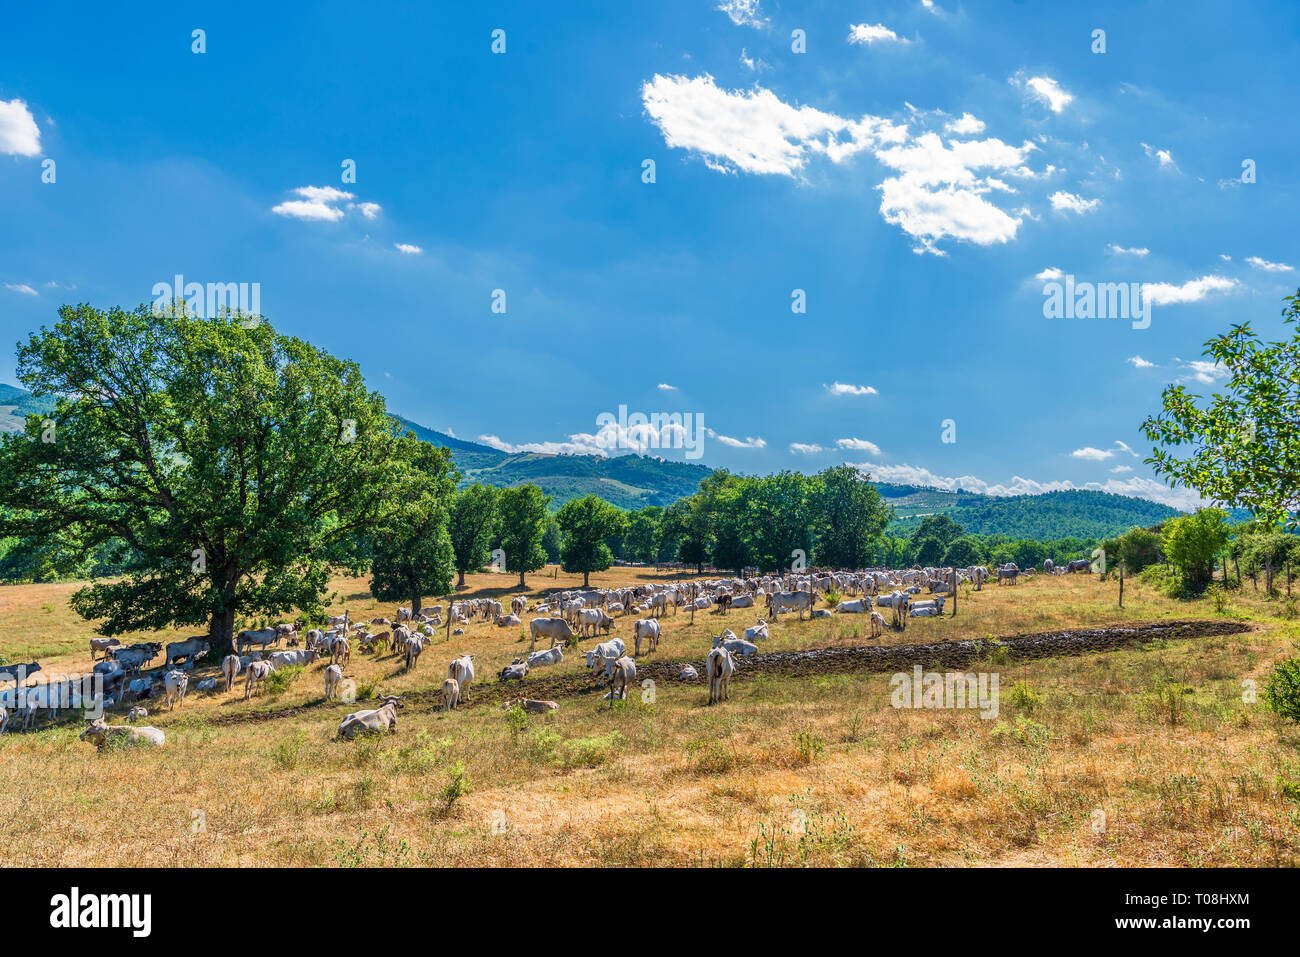 scenes from an outside party during the transhumance Stock Photo